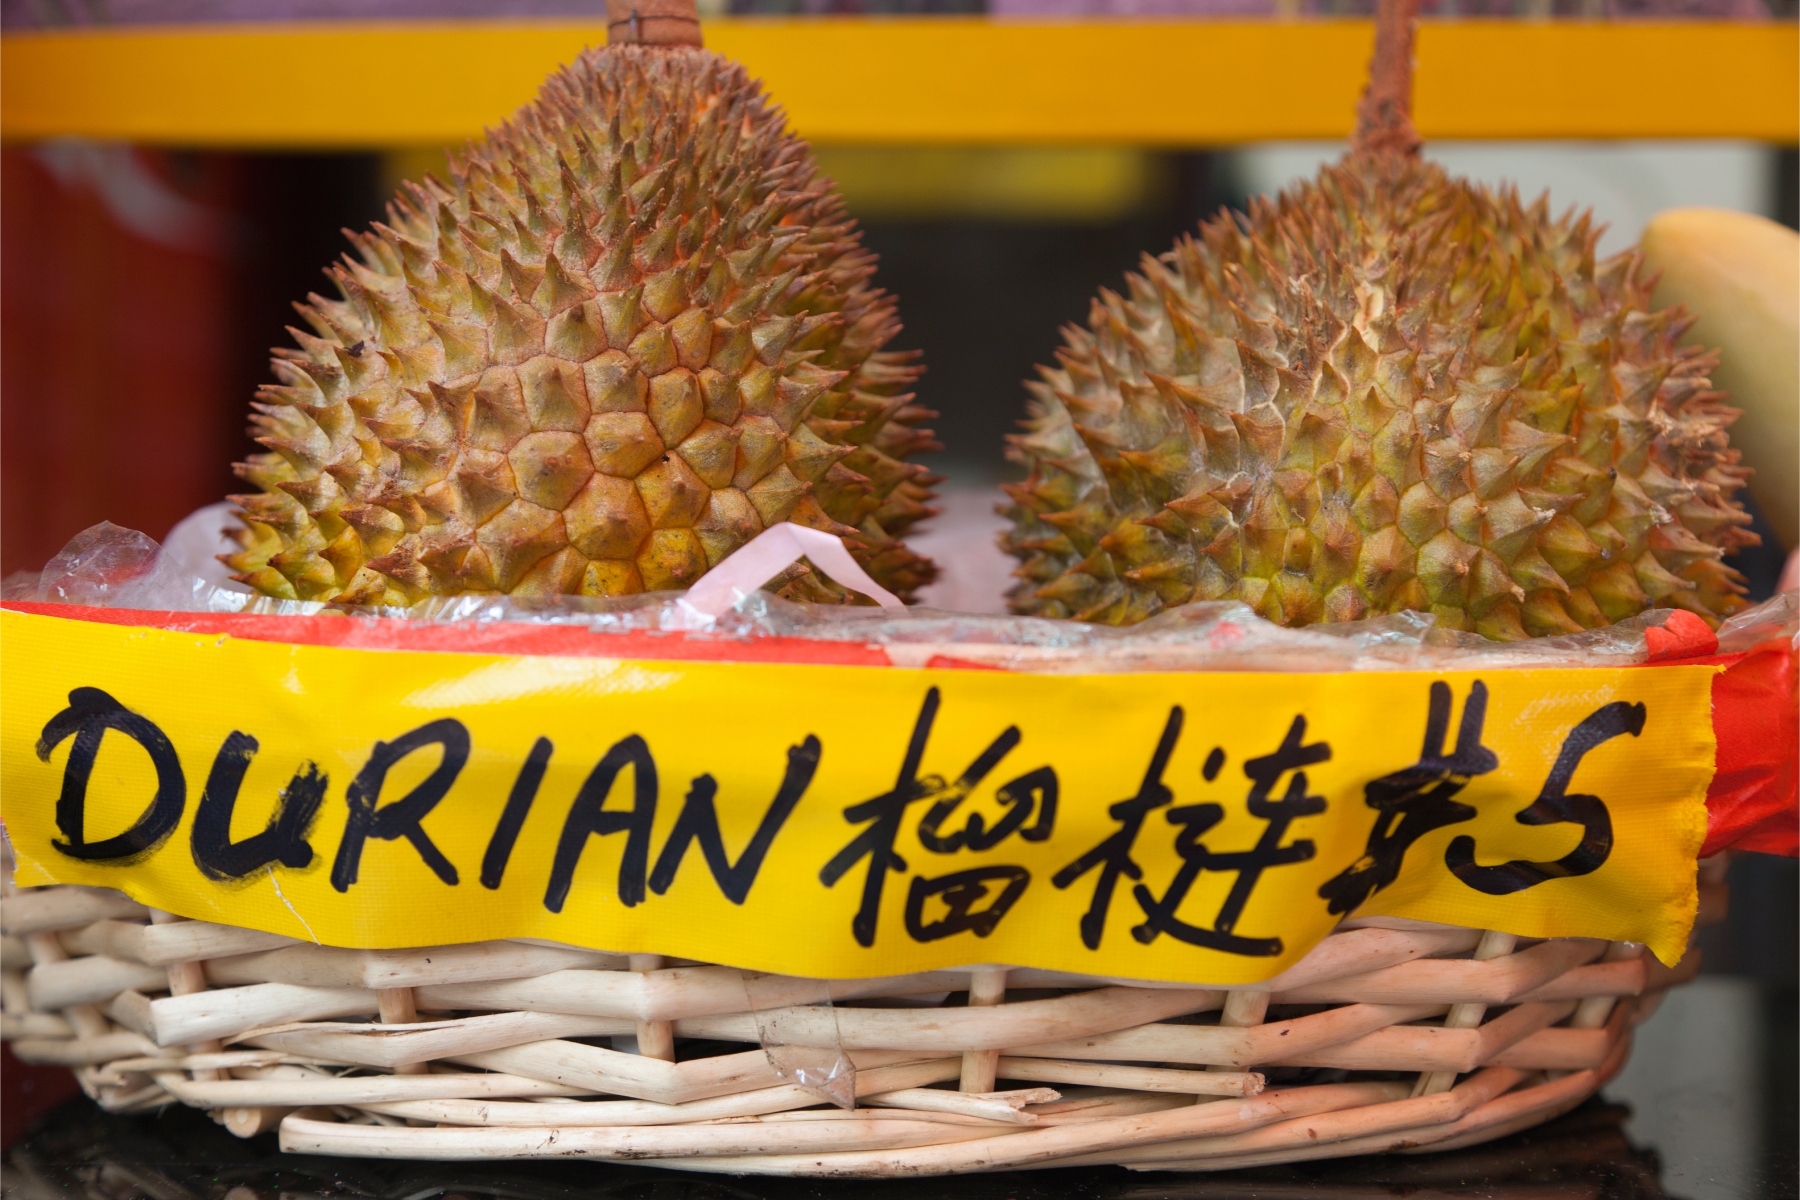 Two durian fruits for sale at a food market